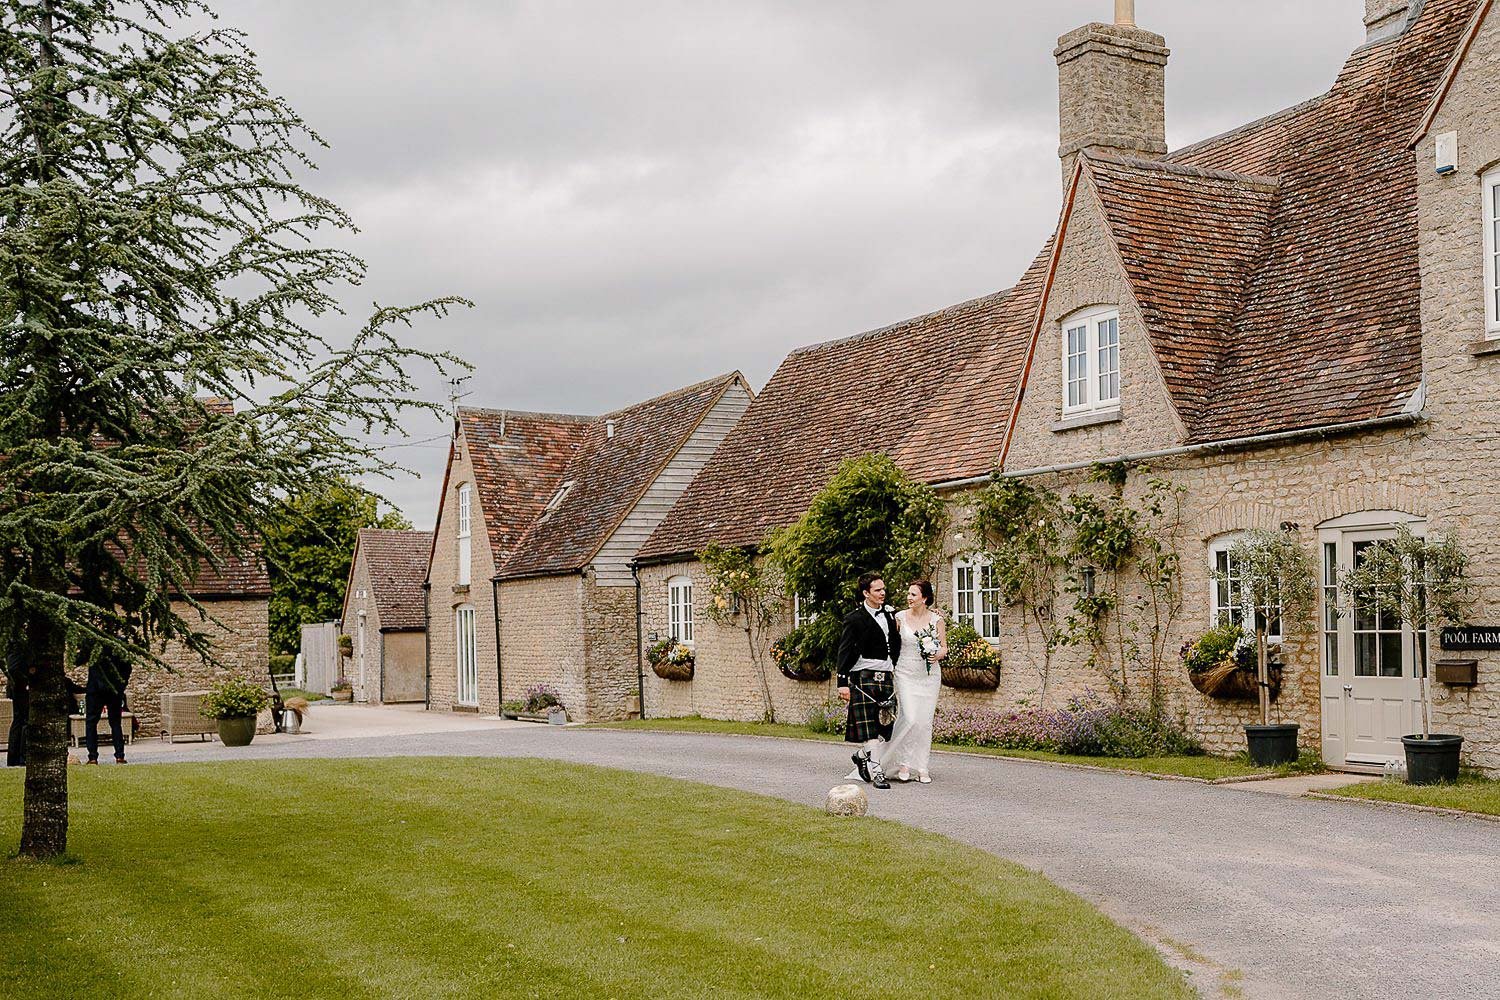 Oxfordshire and the cotswolds wedding photographer 2022 review182.jpg